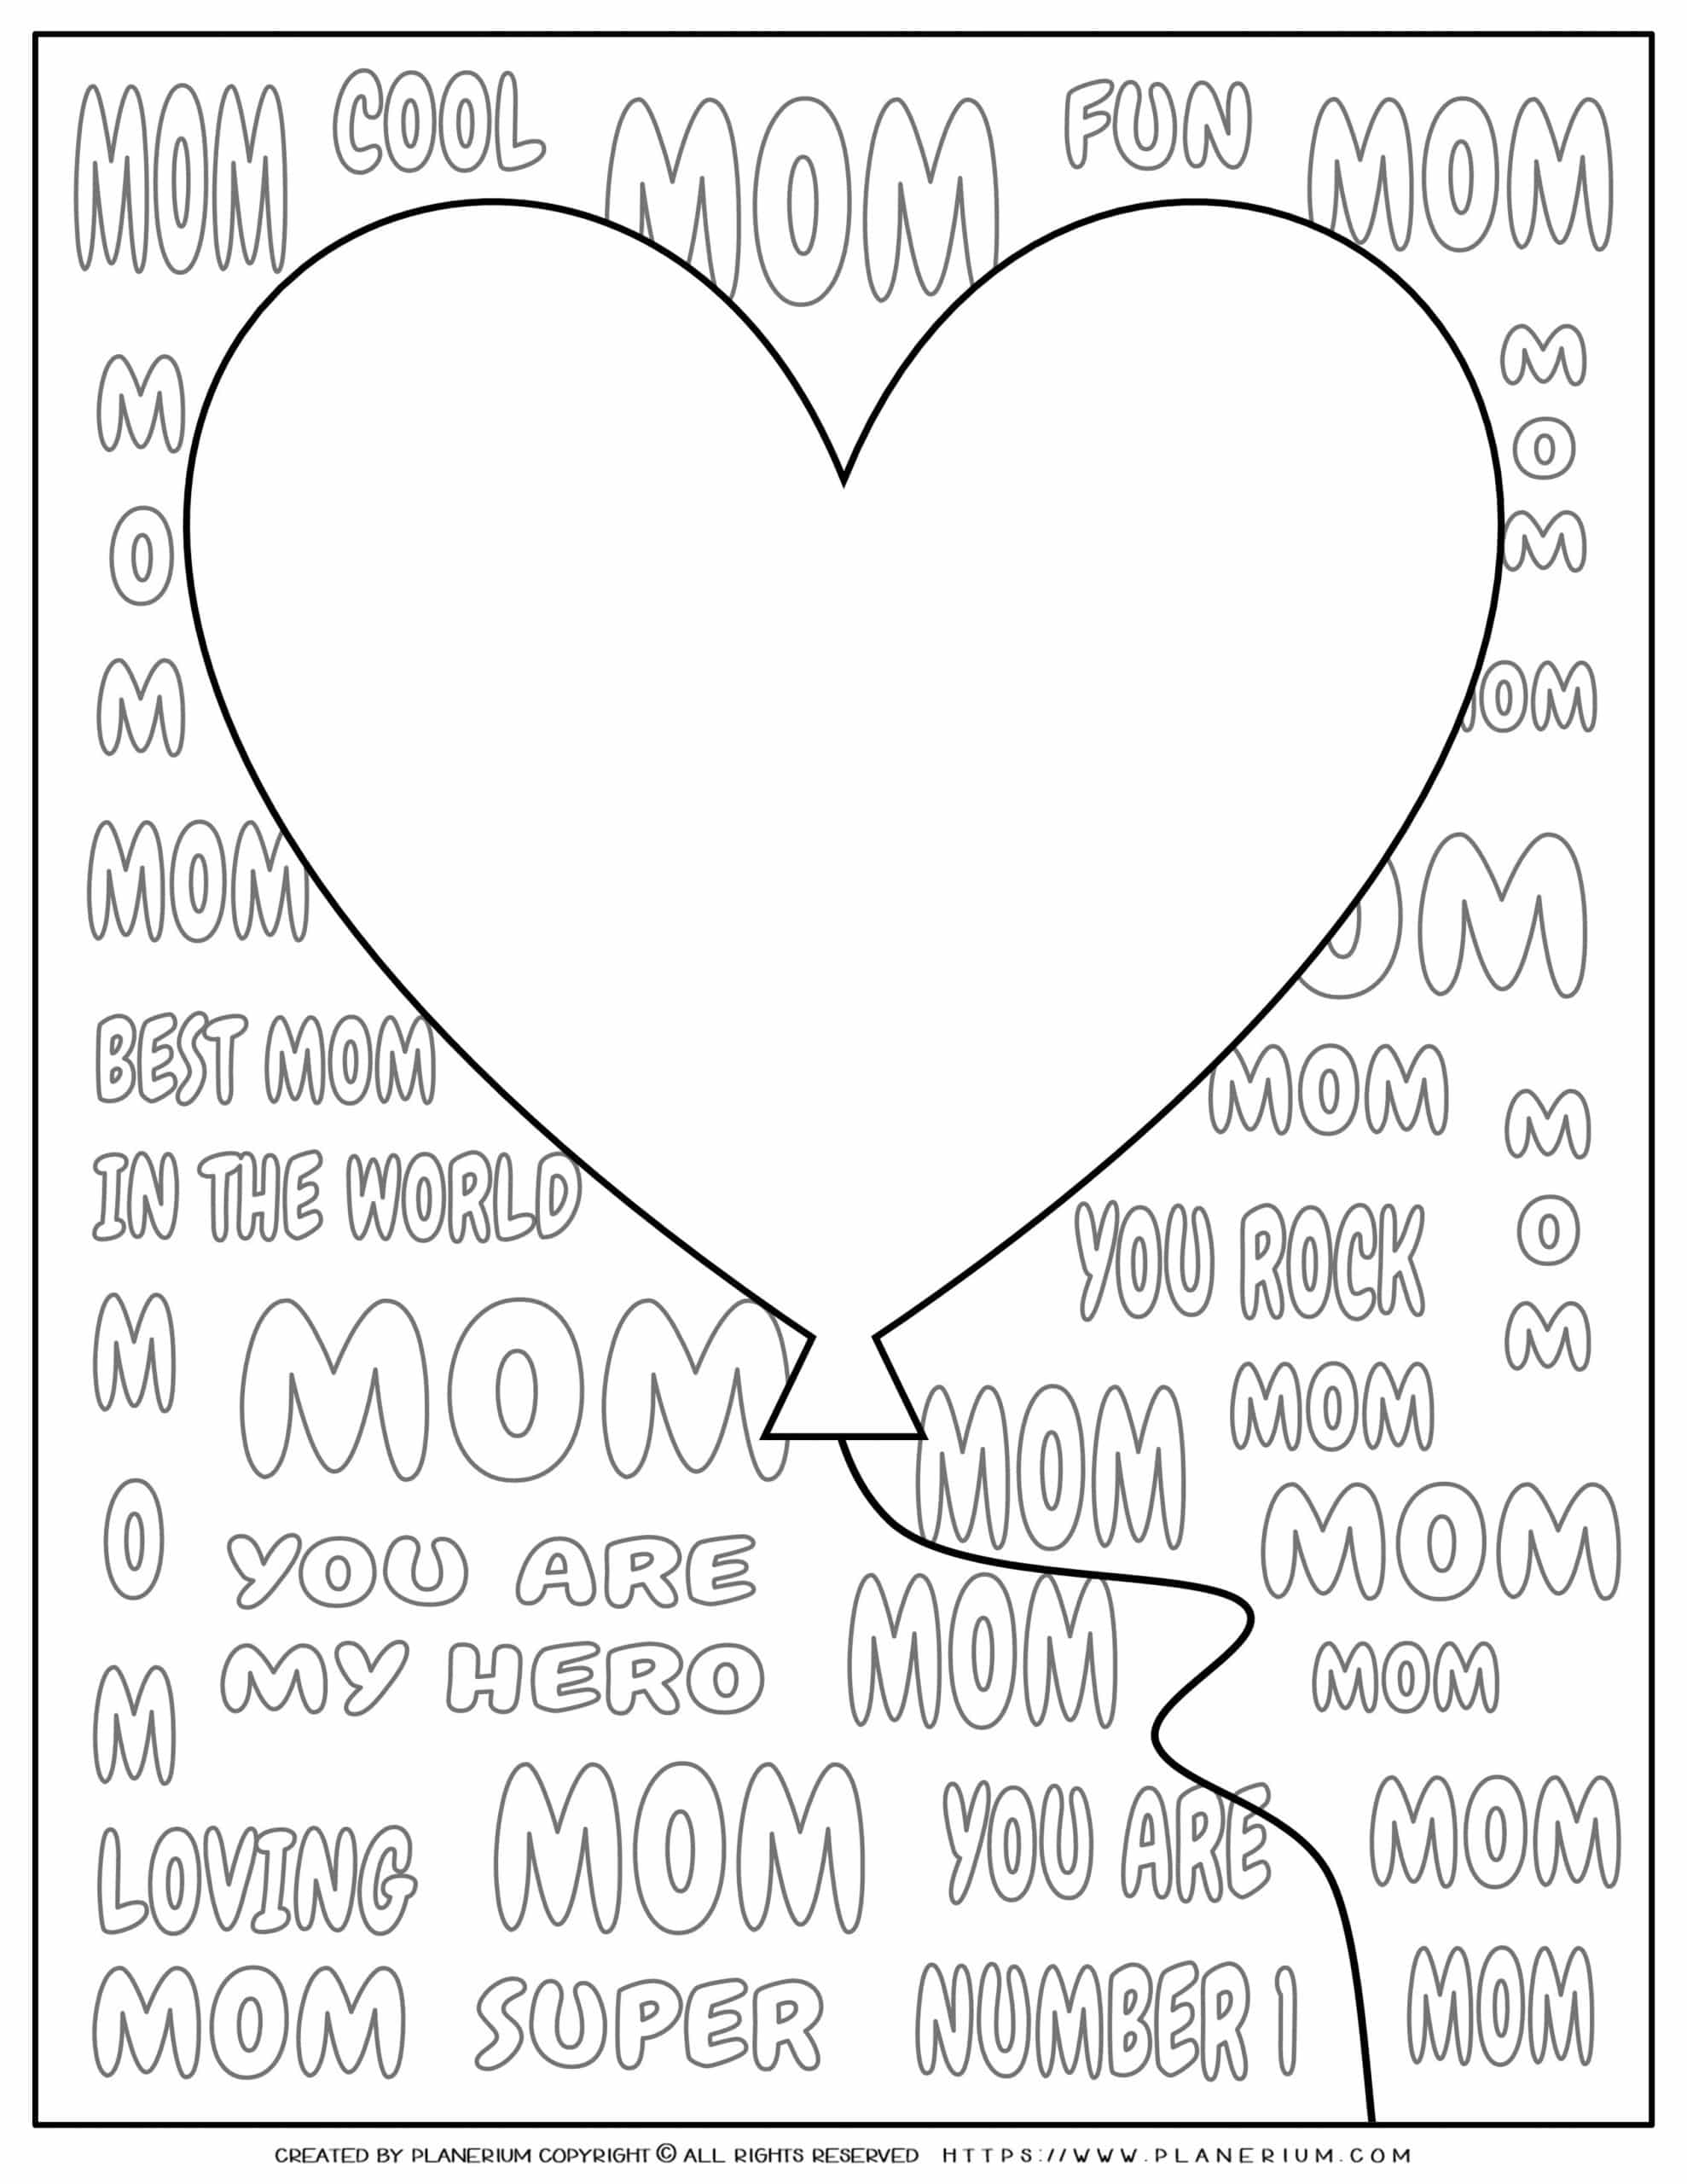 Mother's Day - Coloring Page - Greeting Card